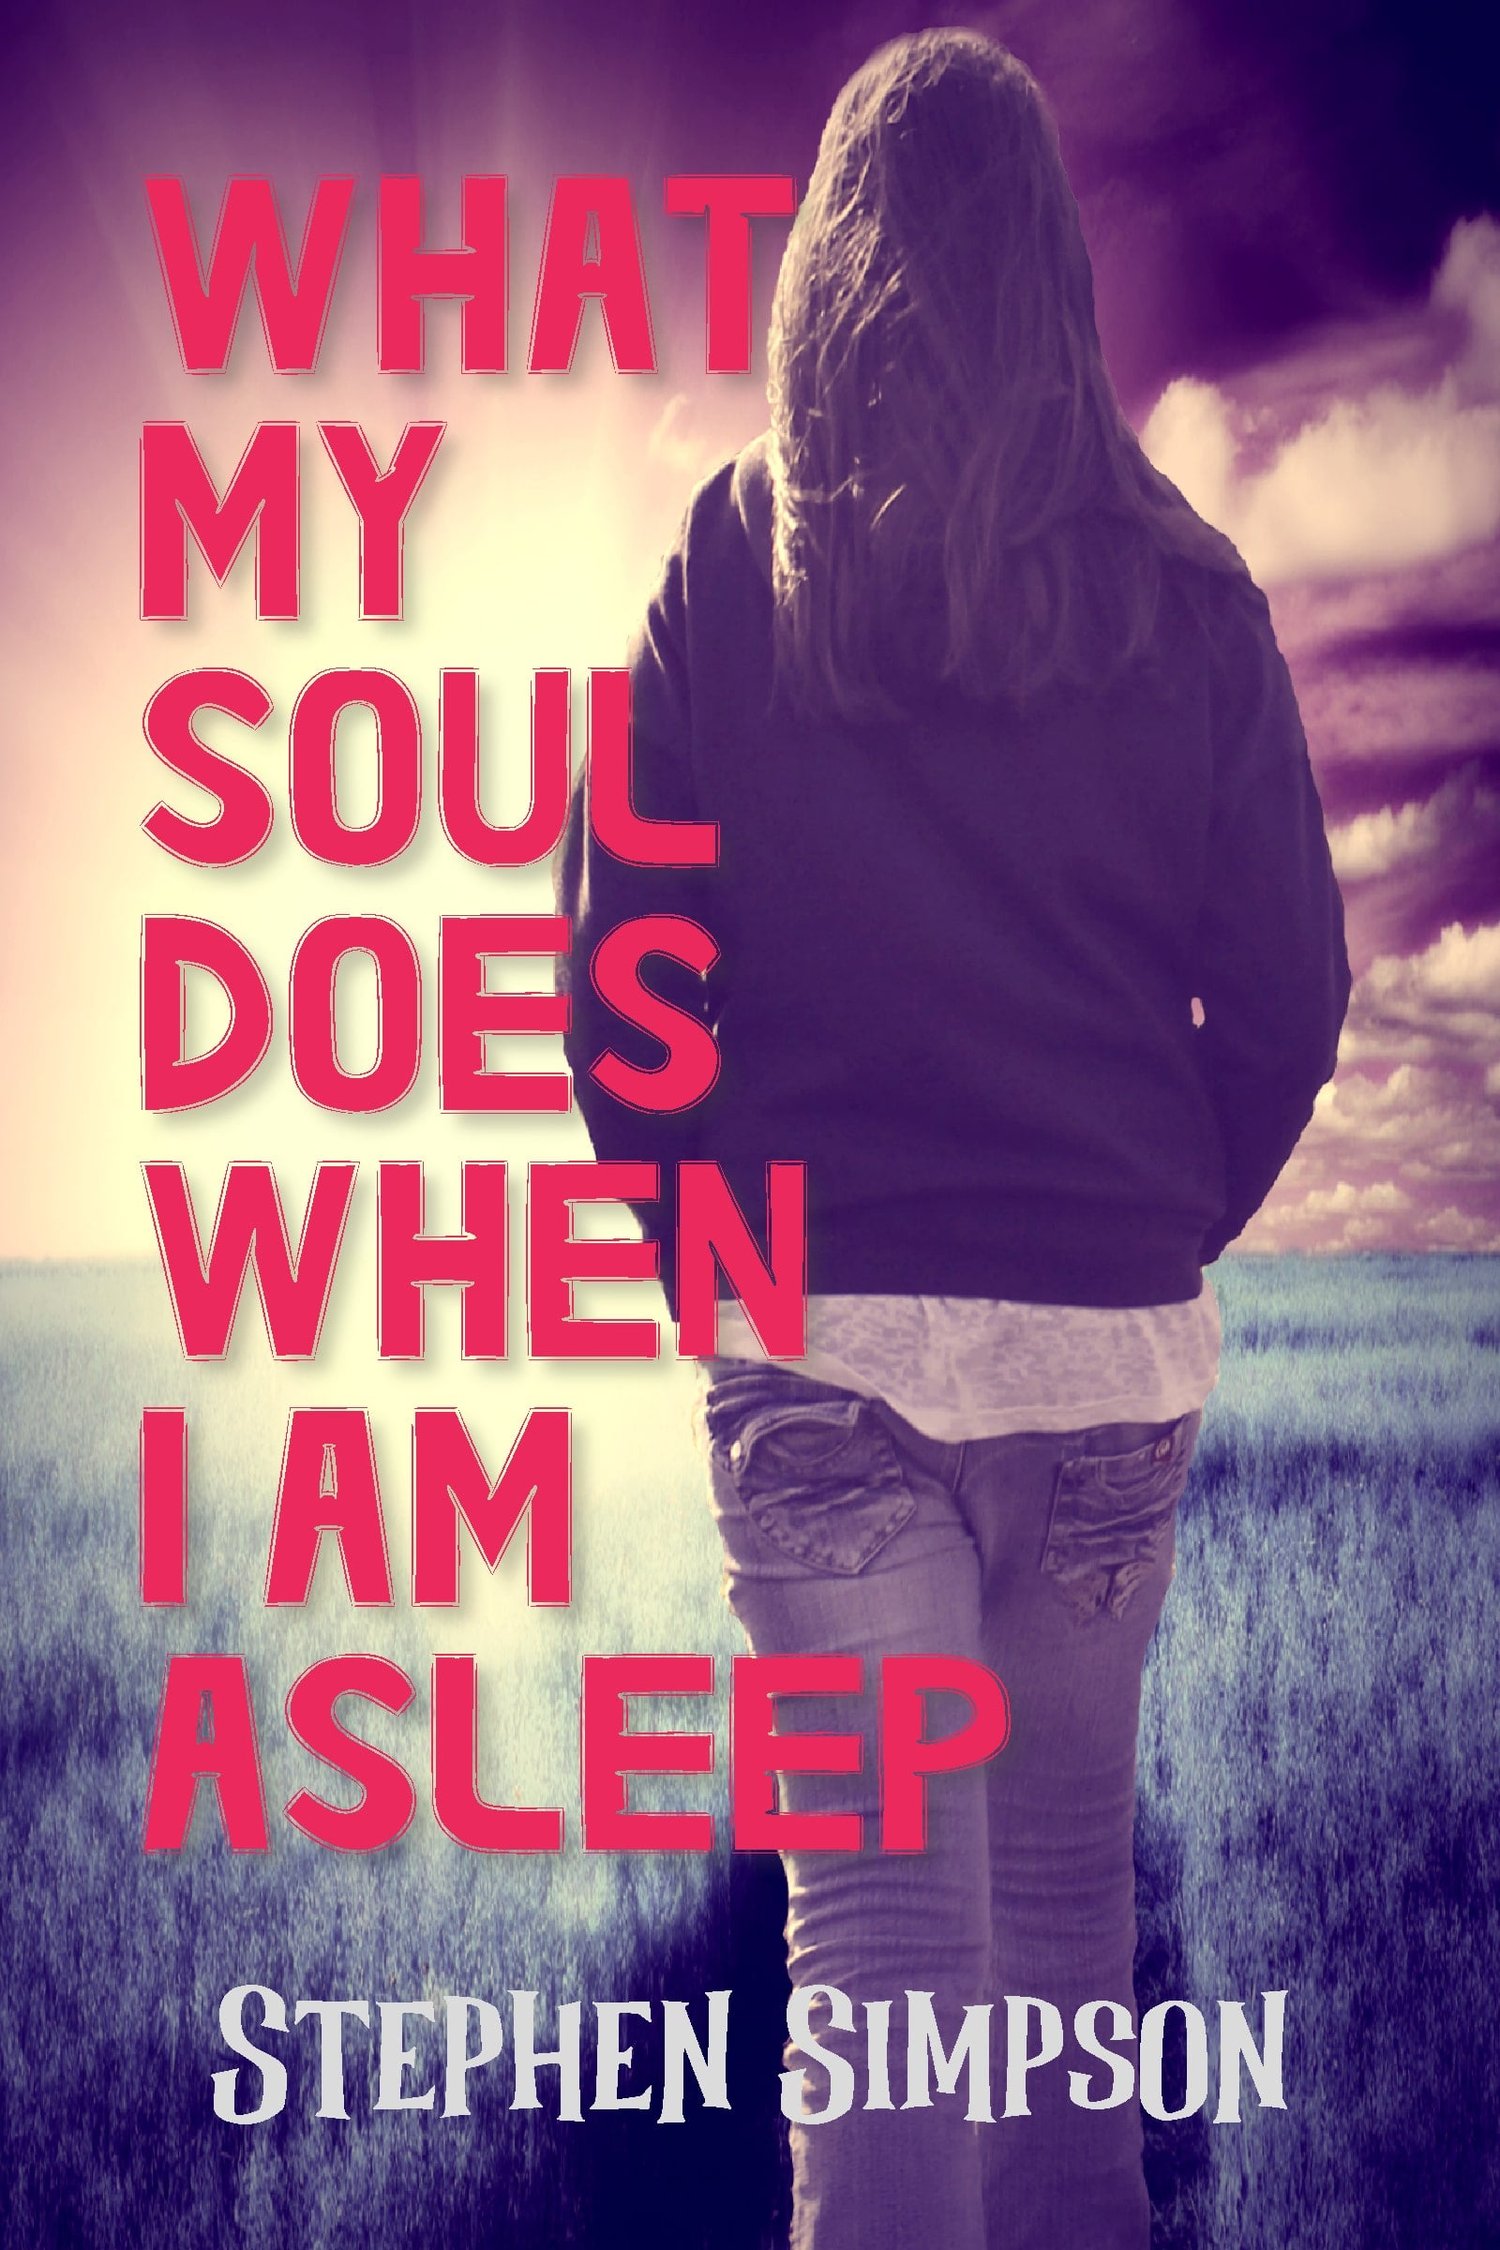 What My Soul Does When I Am Asleep by Stephen Simpson | Young Adult Horror Book